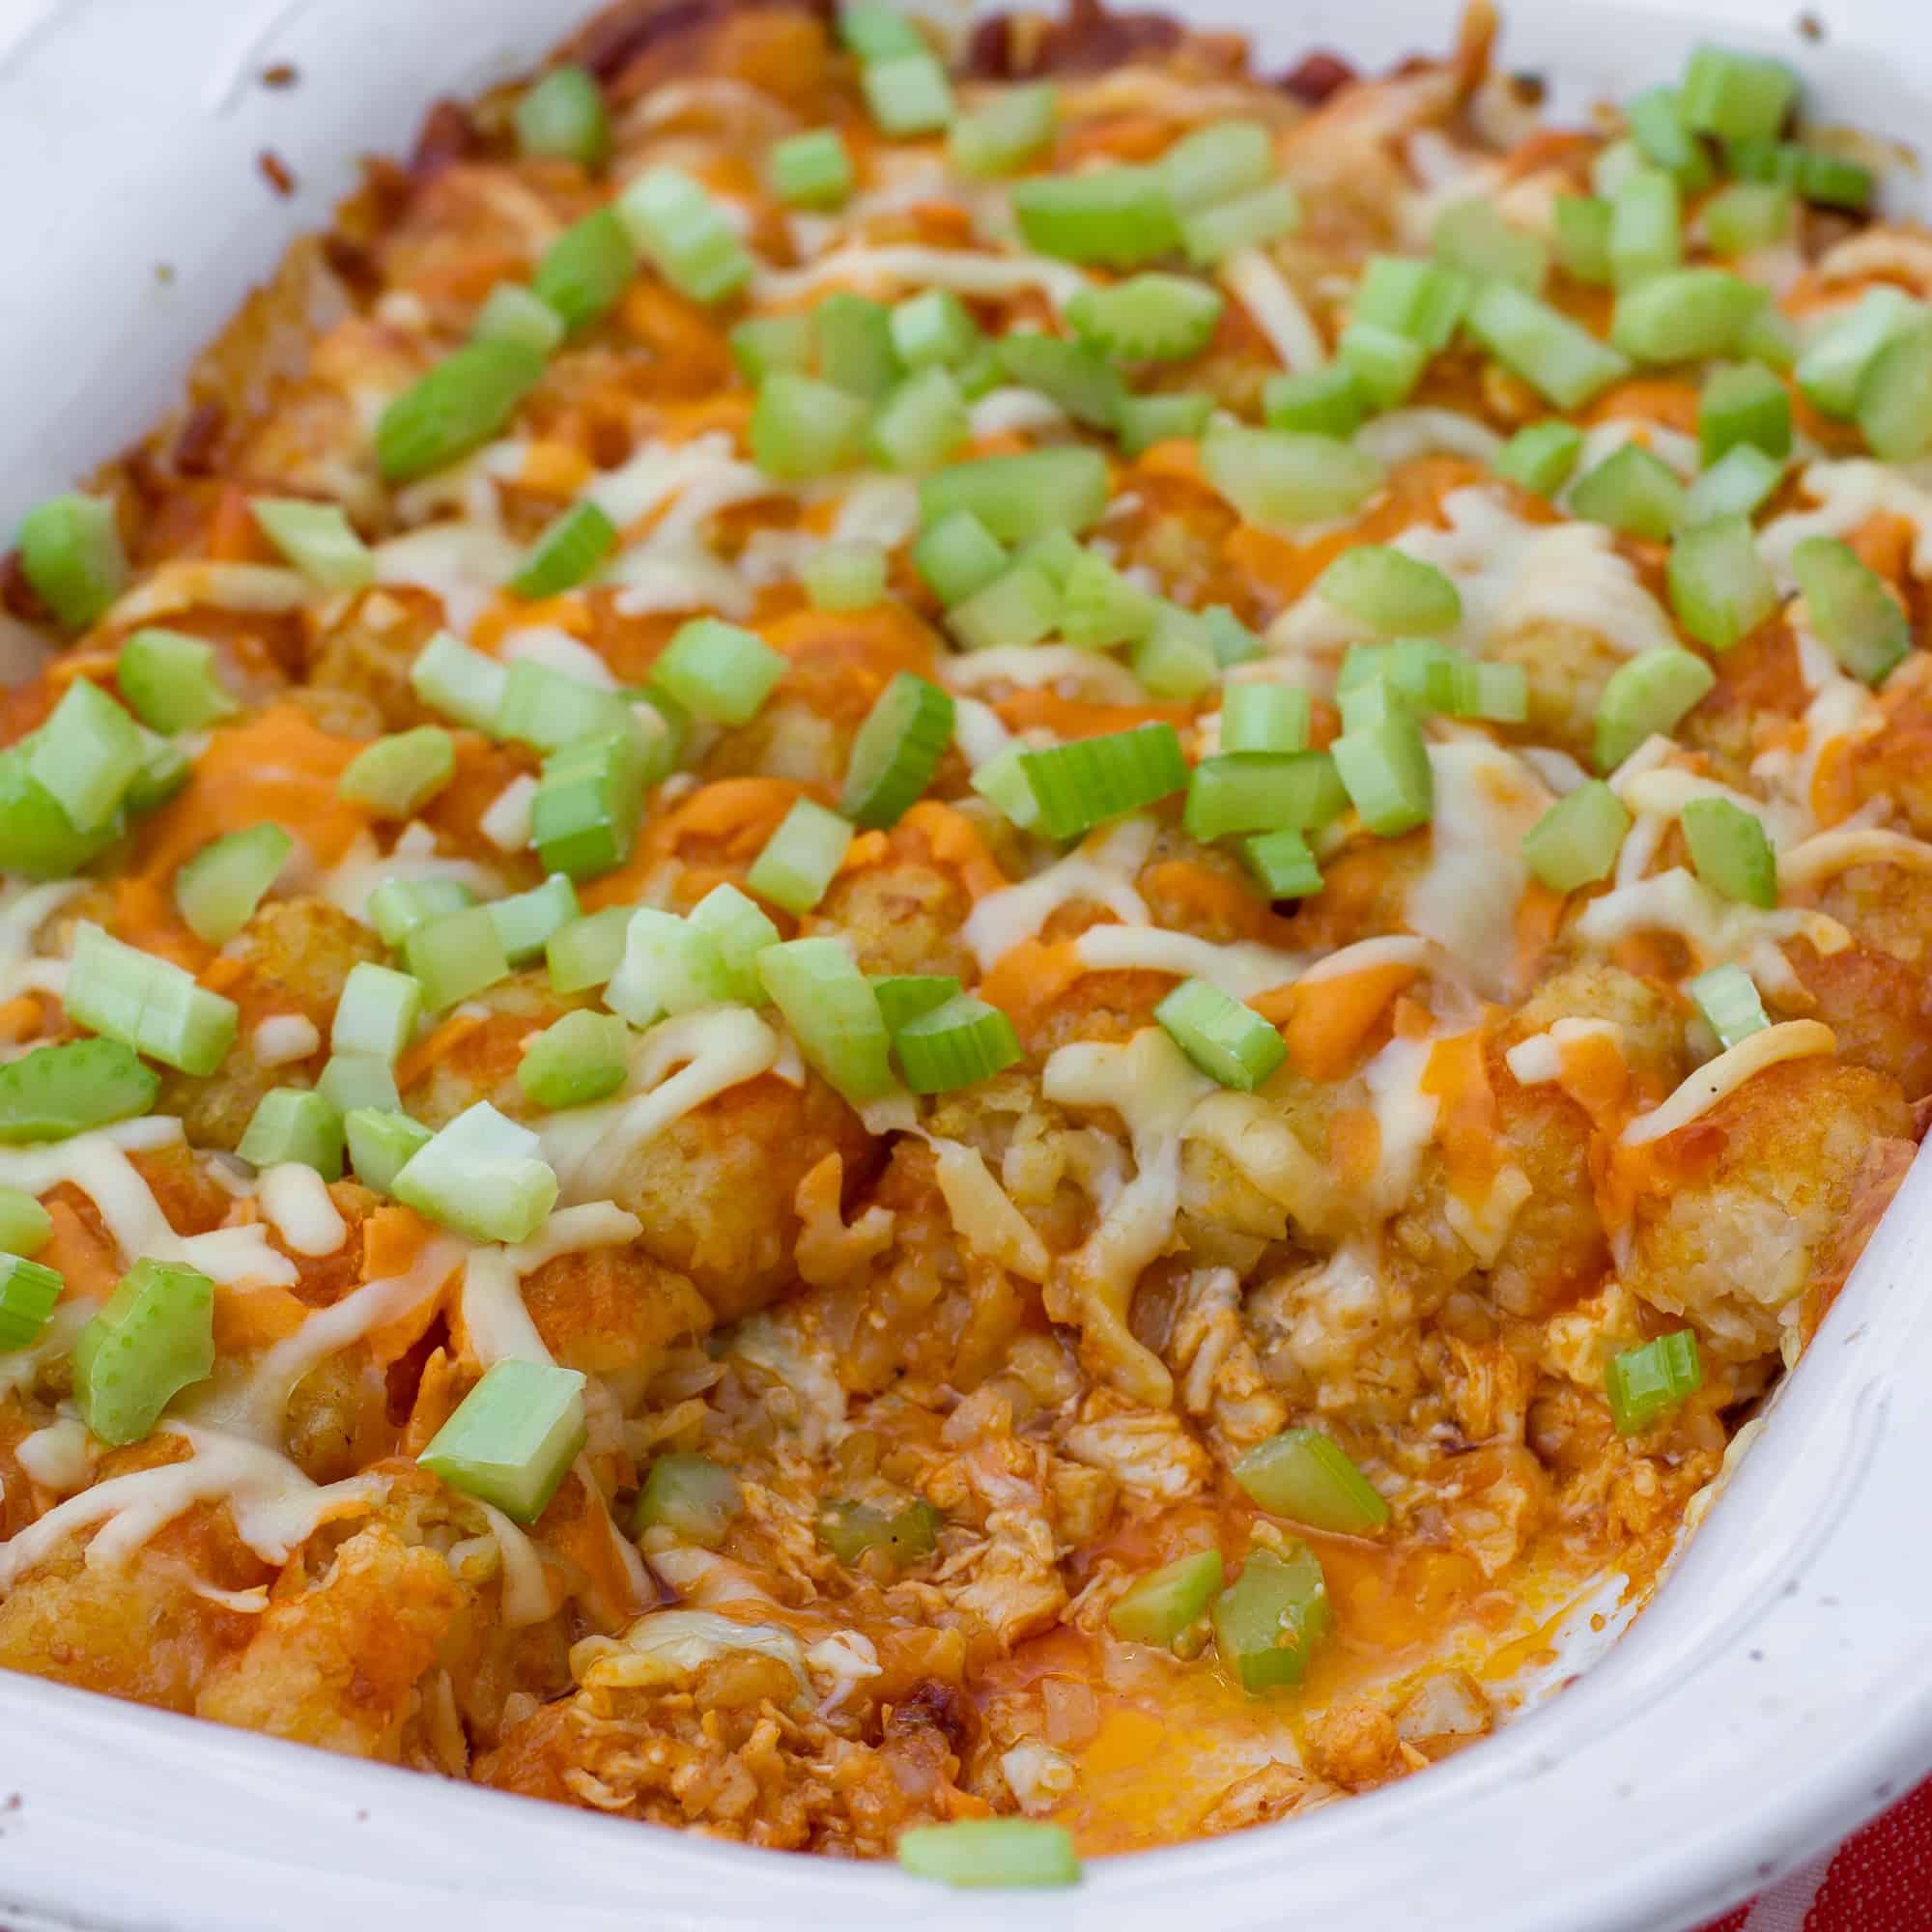 Bake the casserole until tots are crispy on top